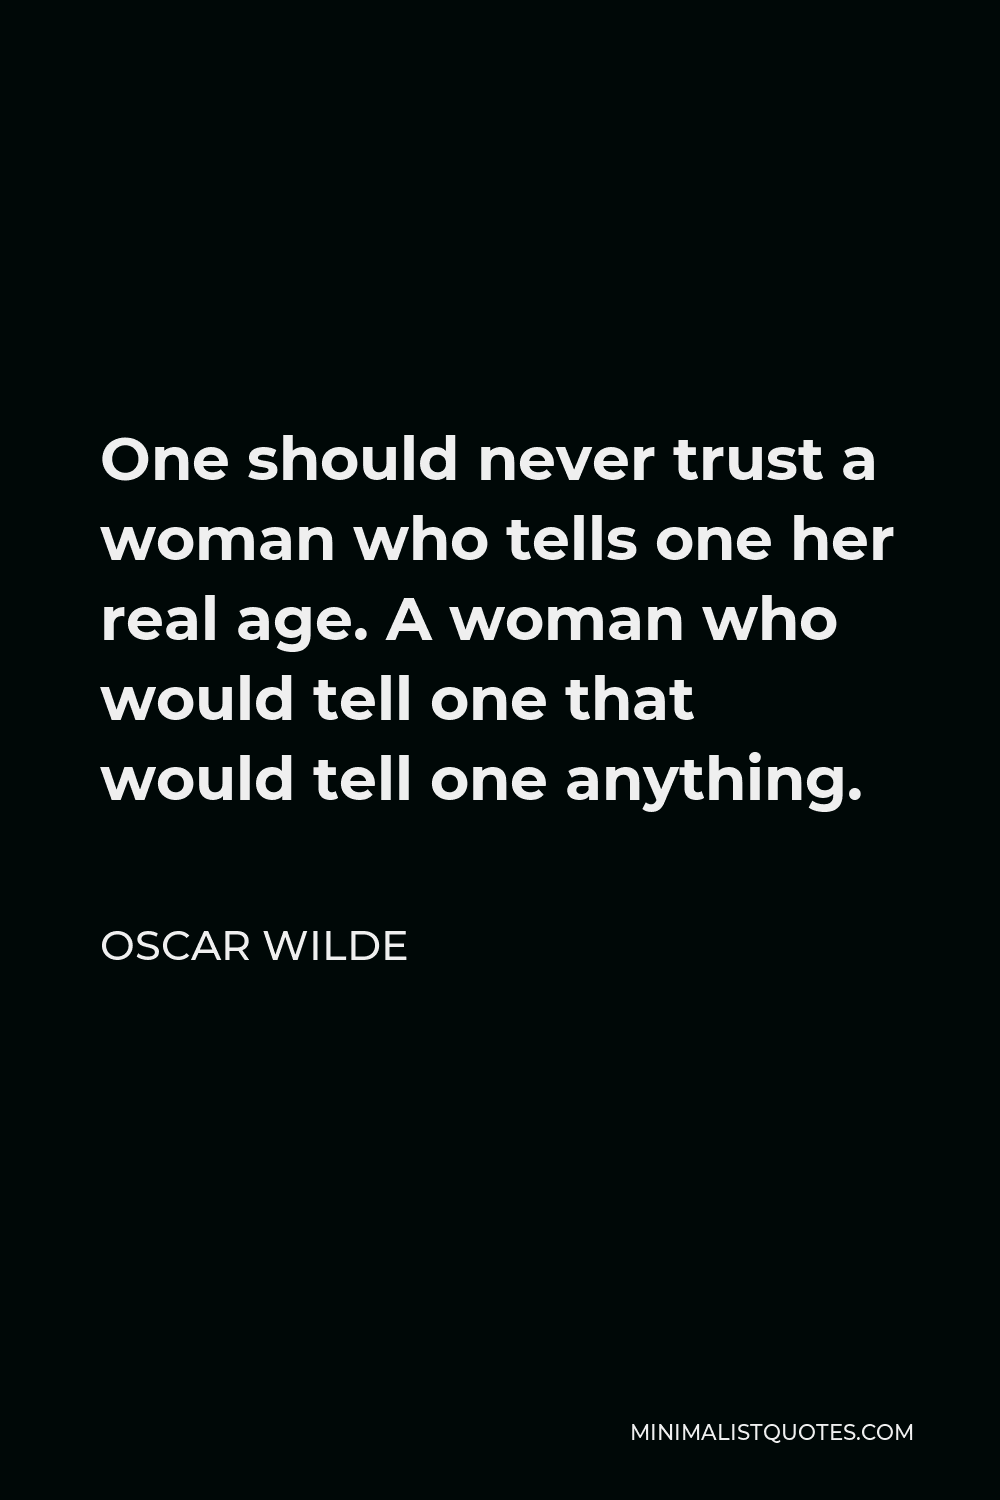 Oscar Wilde Quote - One should never trust a woman who tells one her real age. A woman who would tell one that would tell one anything.